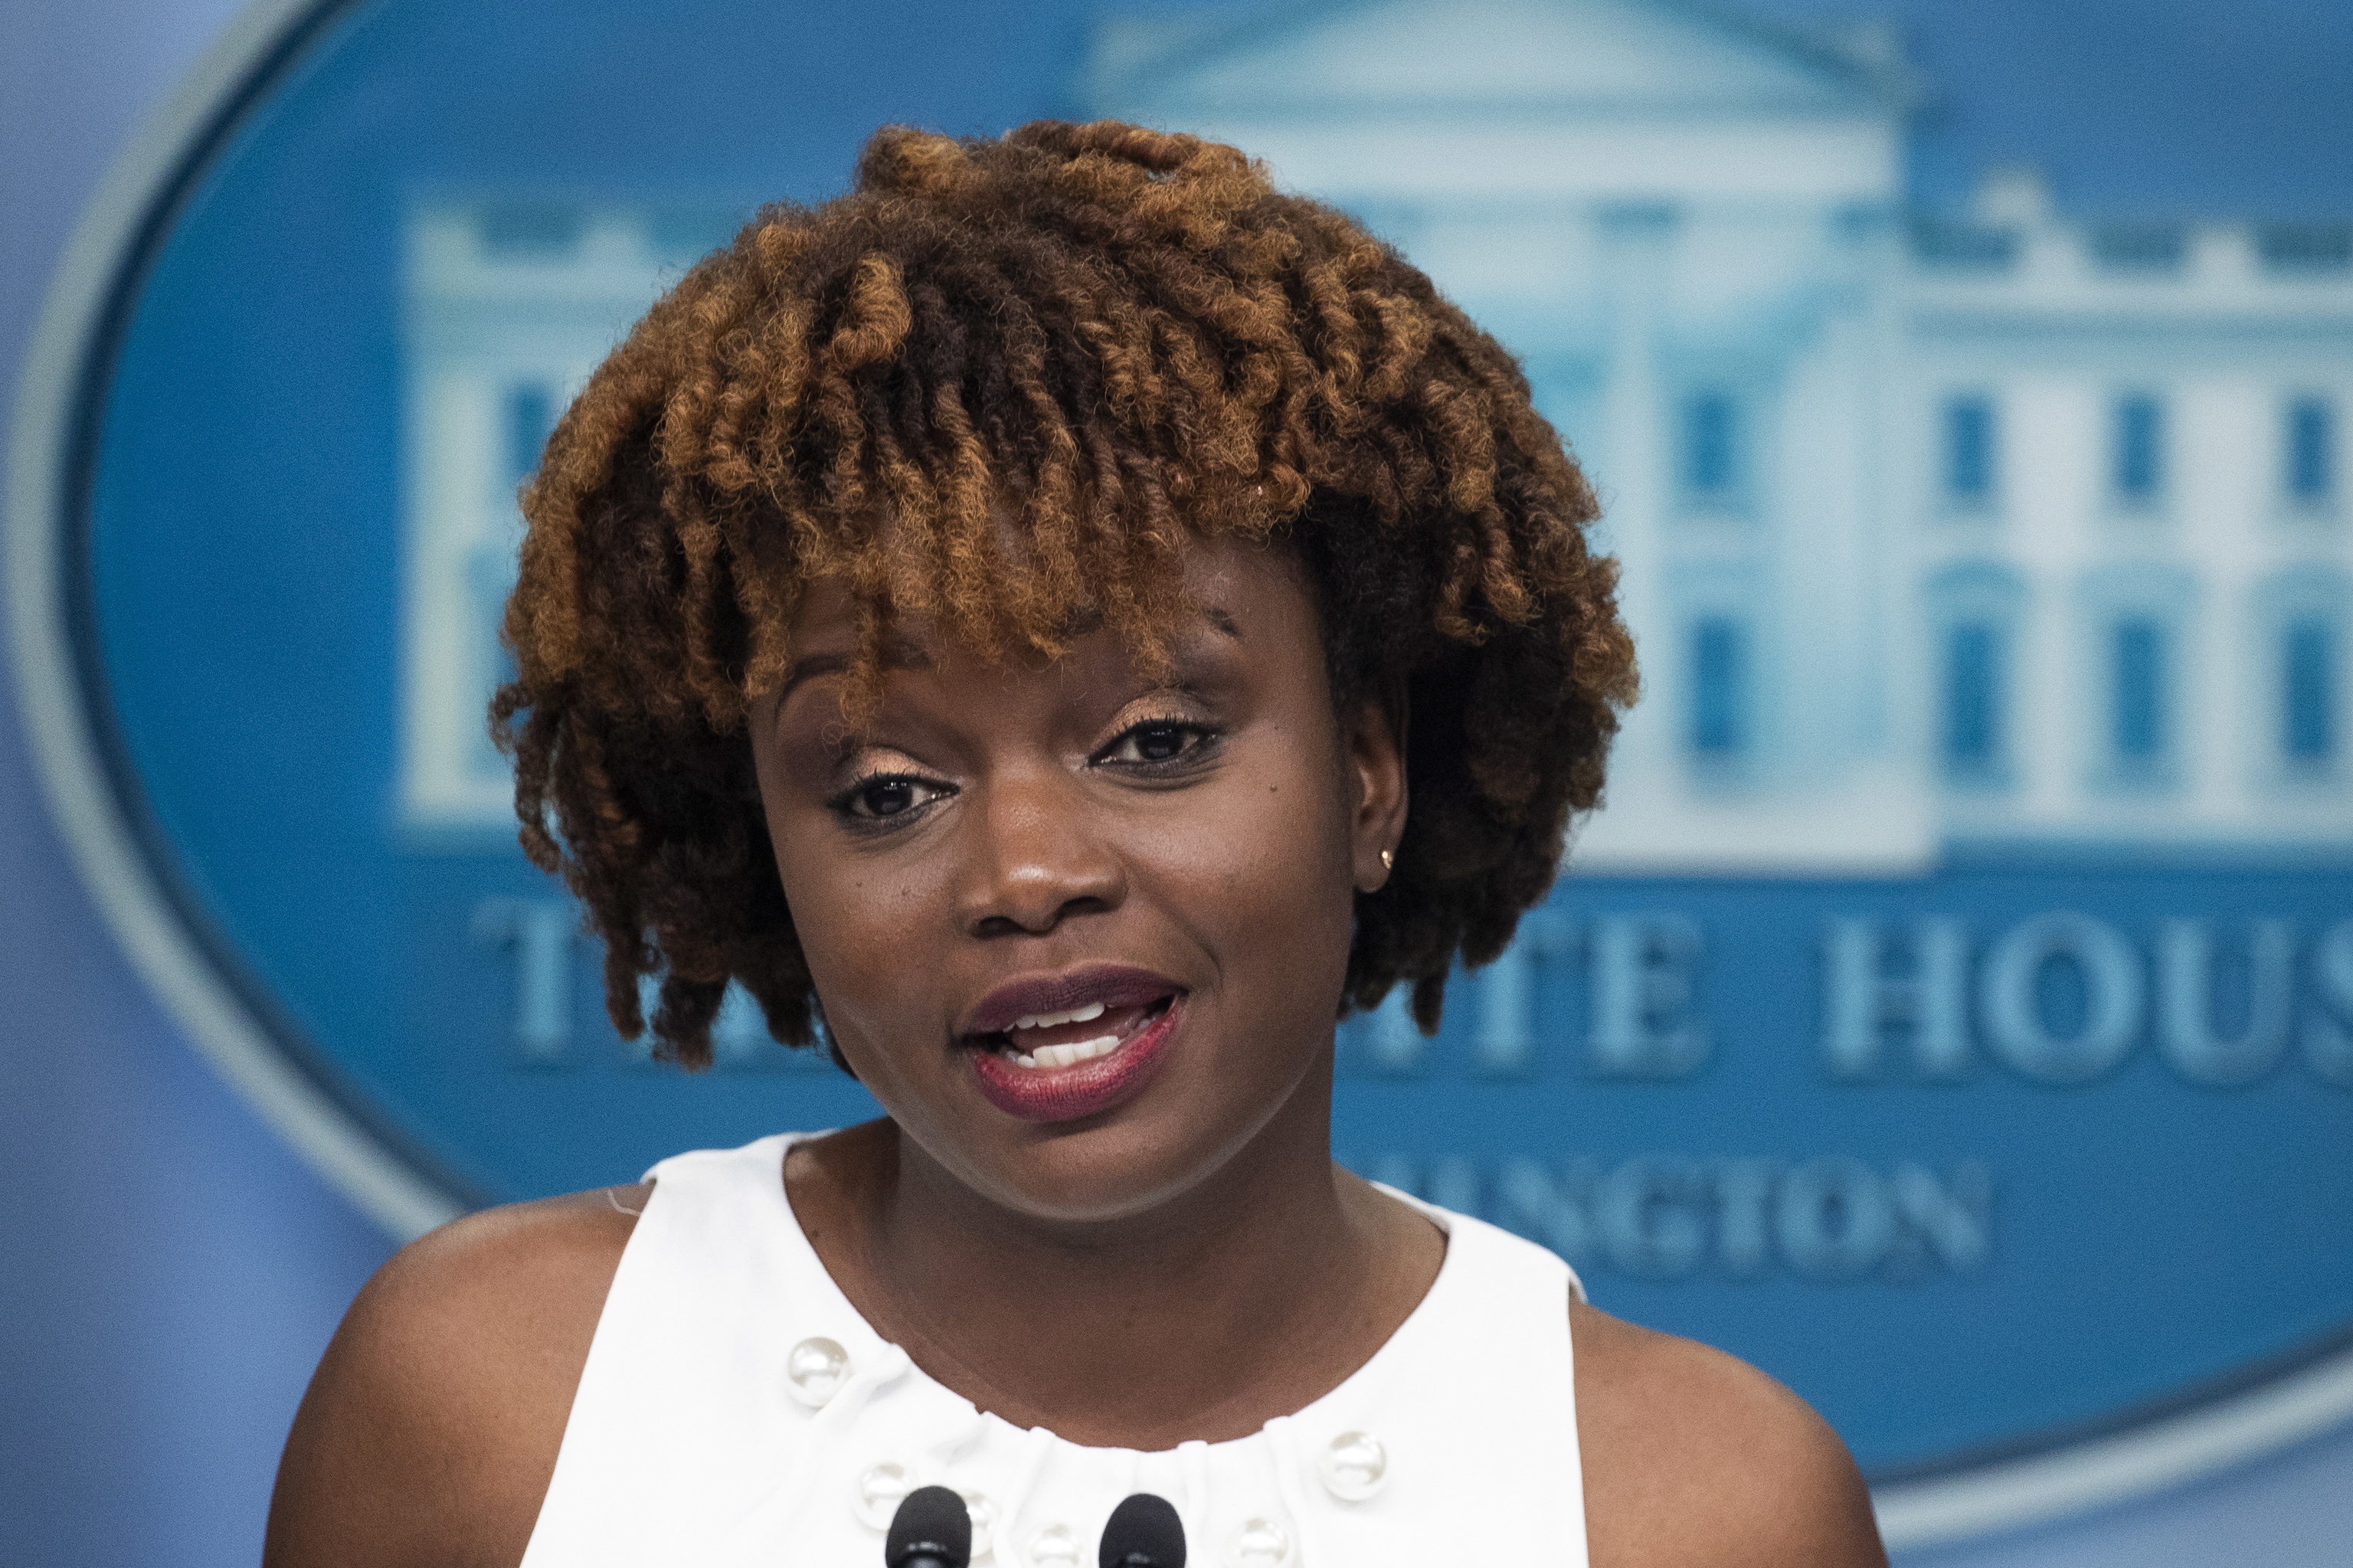 Carin Jean-Pierre addresses the press as the new spokesperson at the White House.